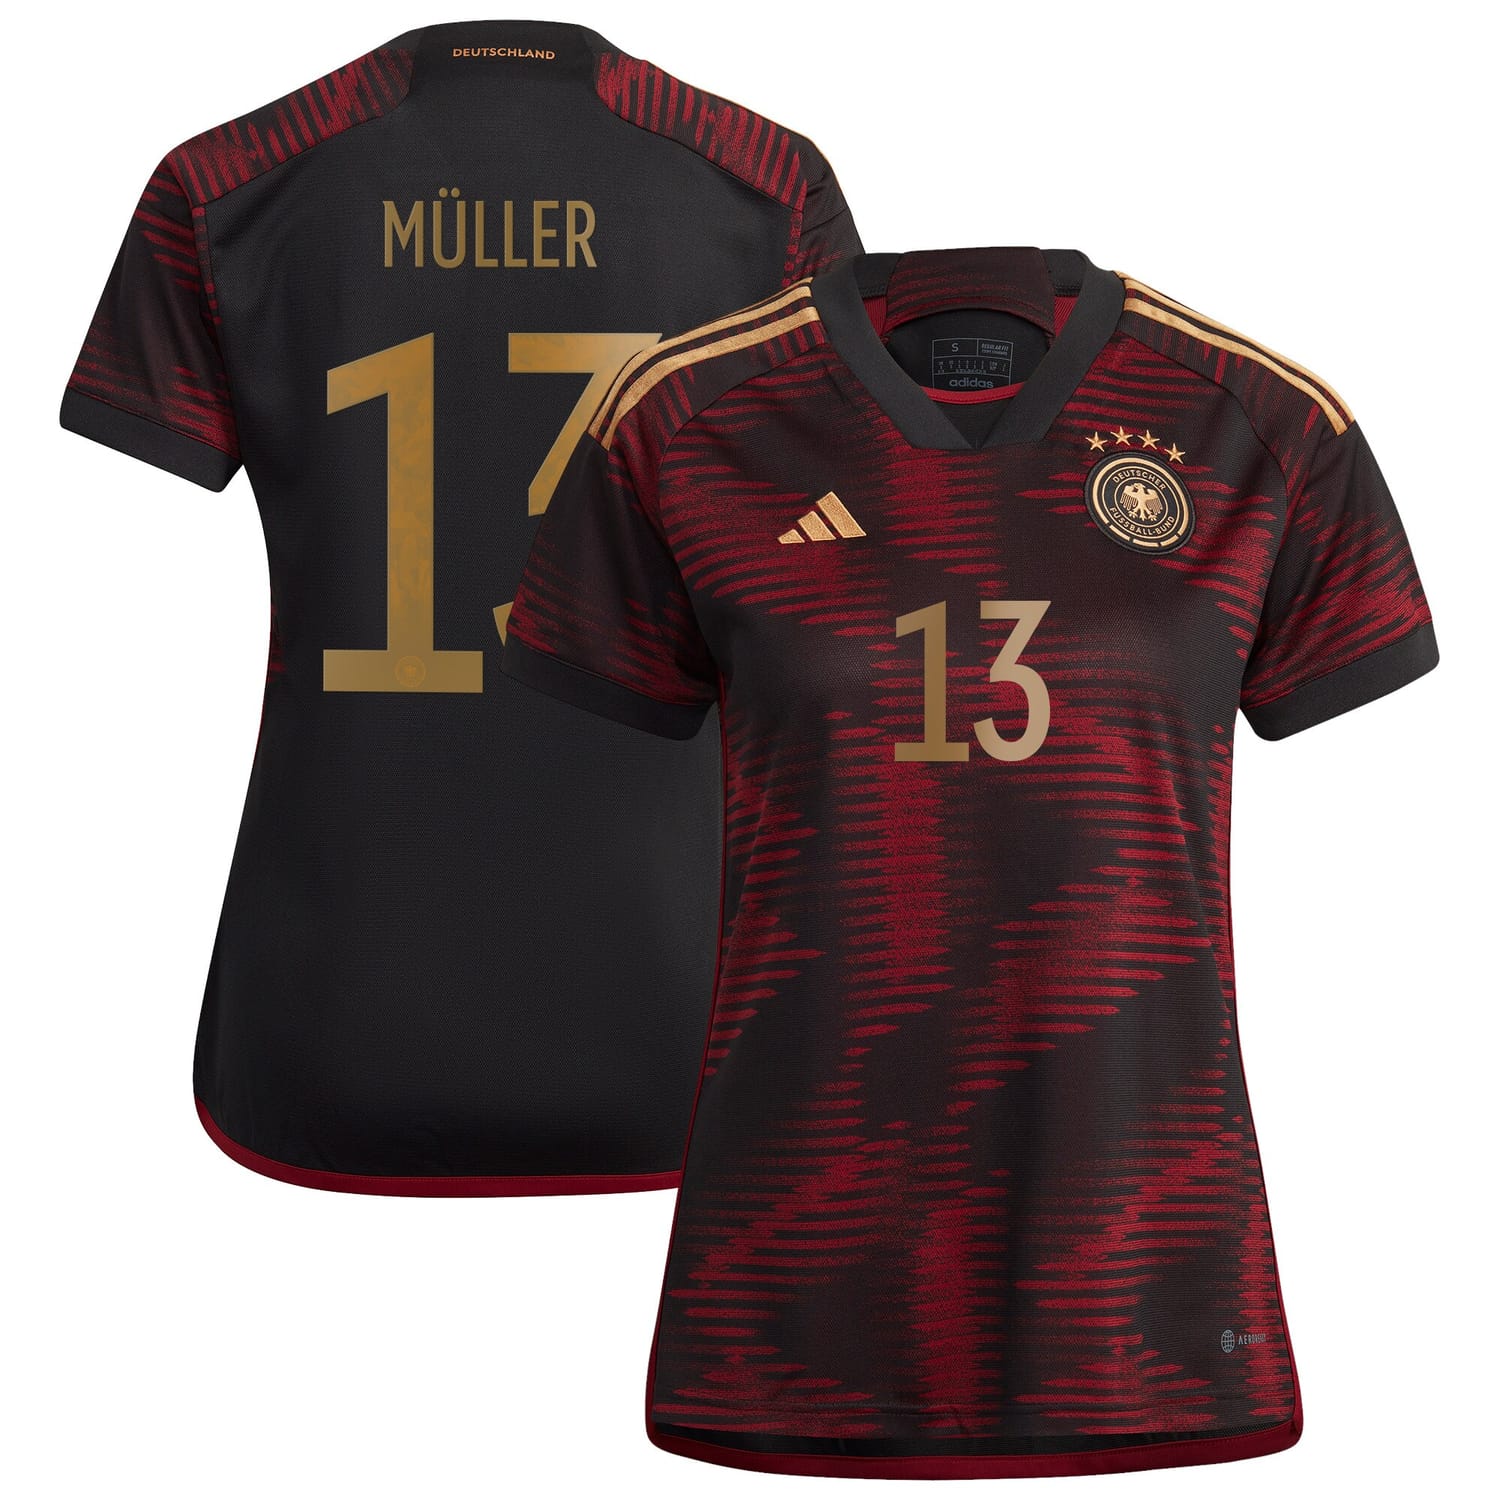 Germany National Team Away Jersey Shirt player Thomas Müller 13 printing for Women